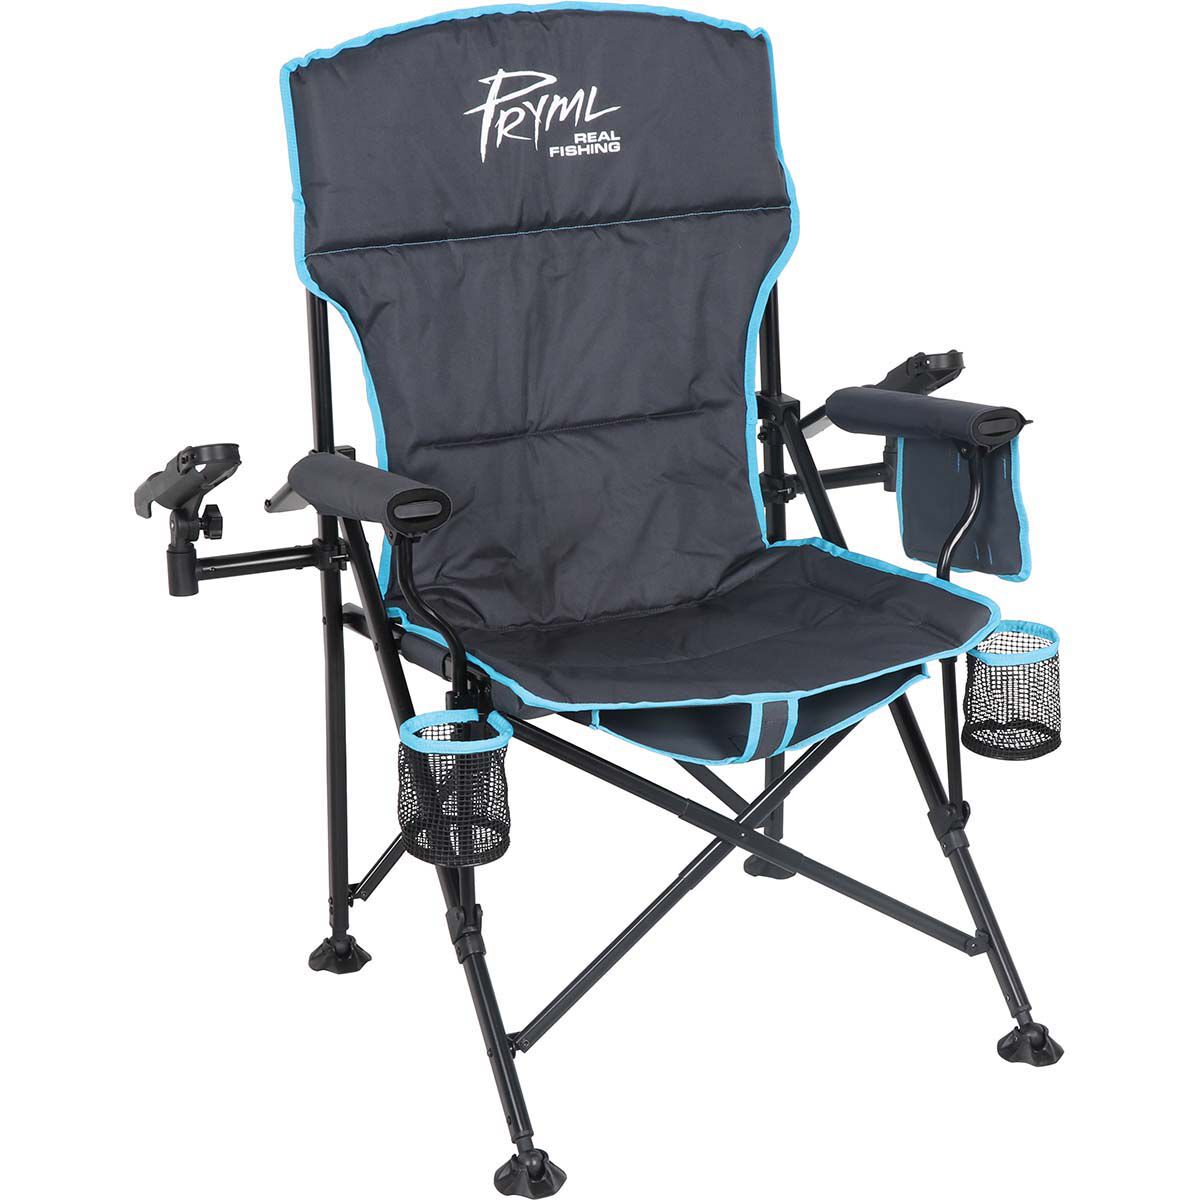 Fishing Chair With Rod Holder Built In Cooler Hands Free Fishing Pole Holder  Storage Pouch Storage Bag For Fishing Accessories Full Size Portable, Fishing  Chair Accessories